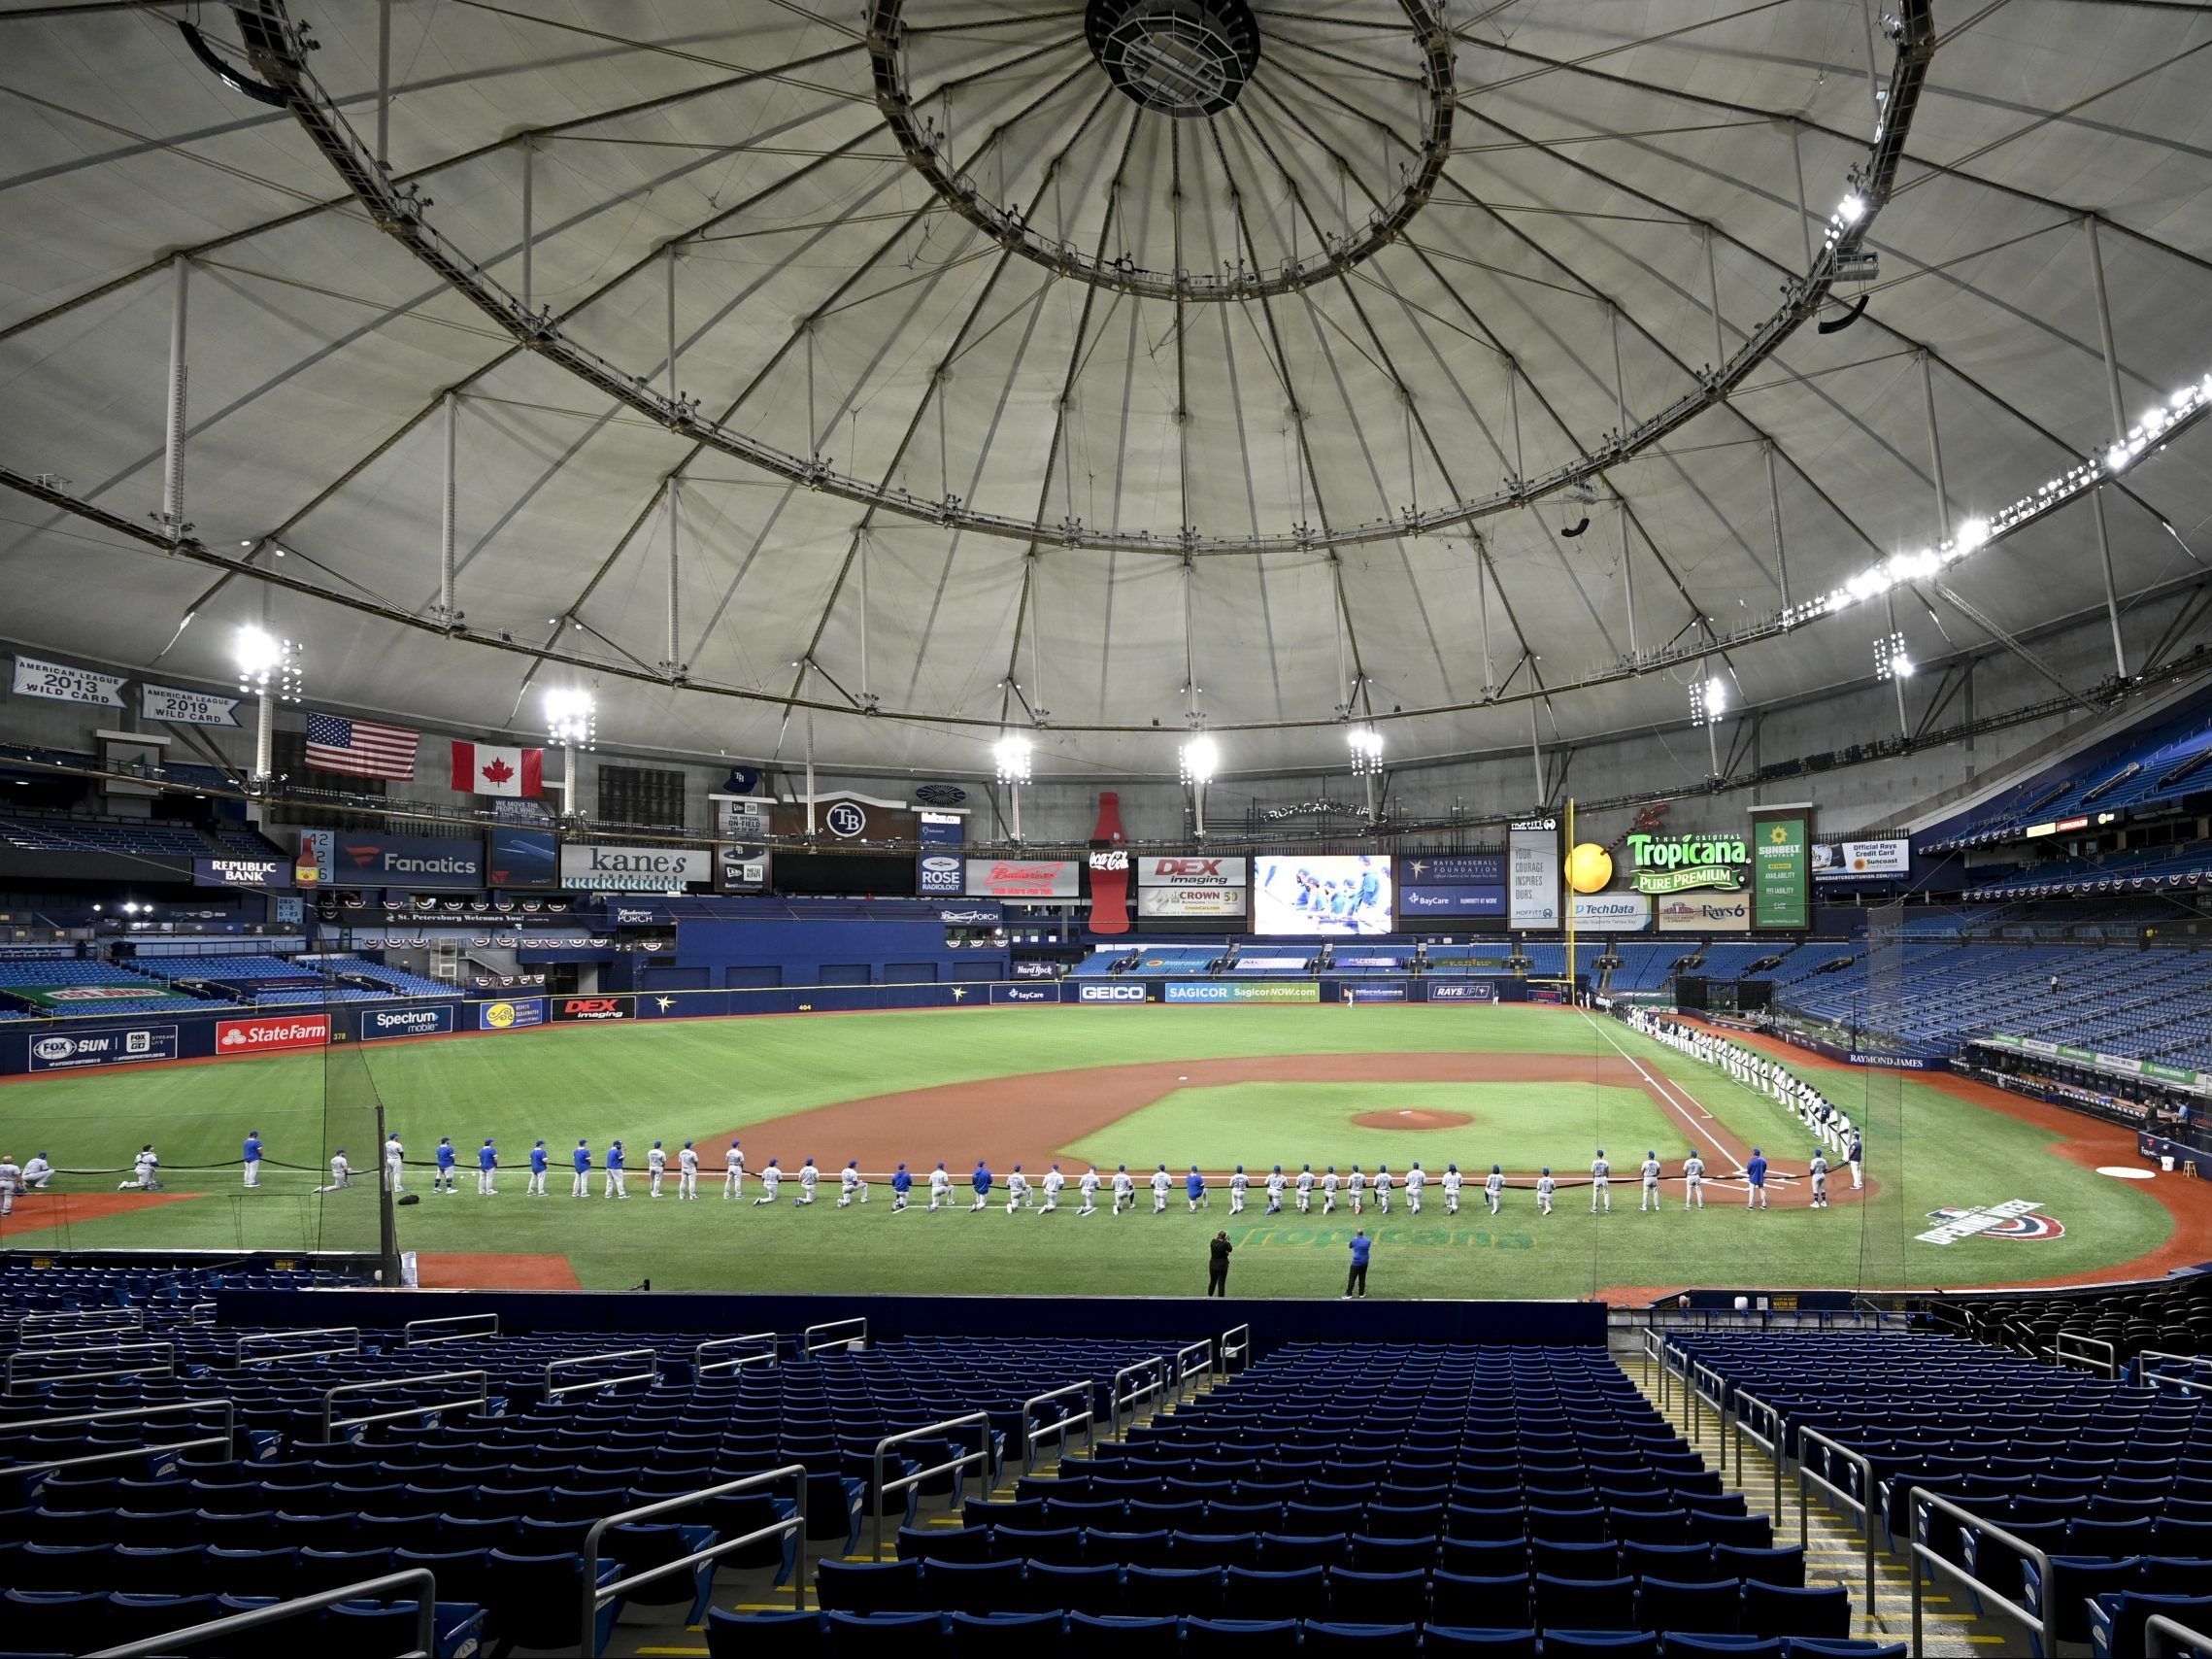 Tampa Bay Rays' road to a new ballpark